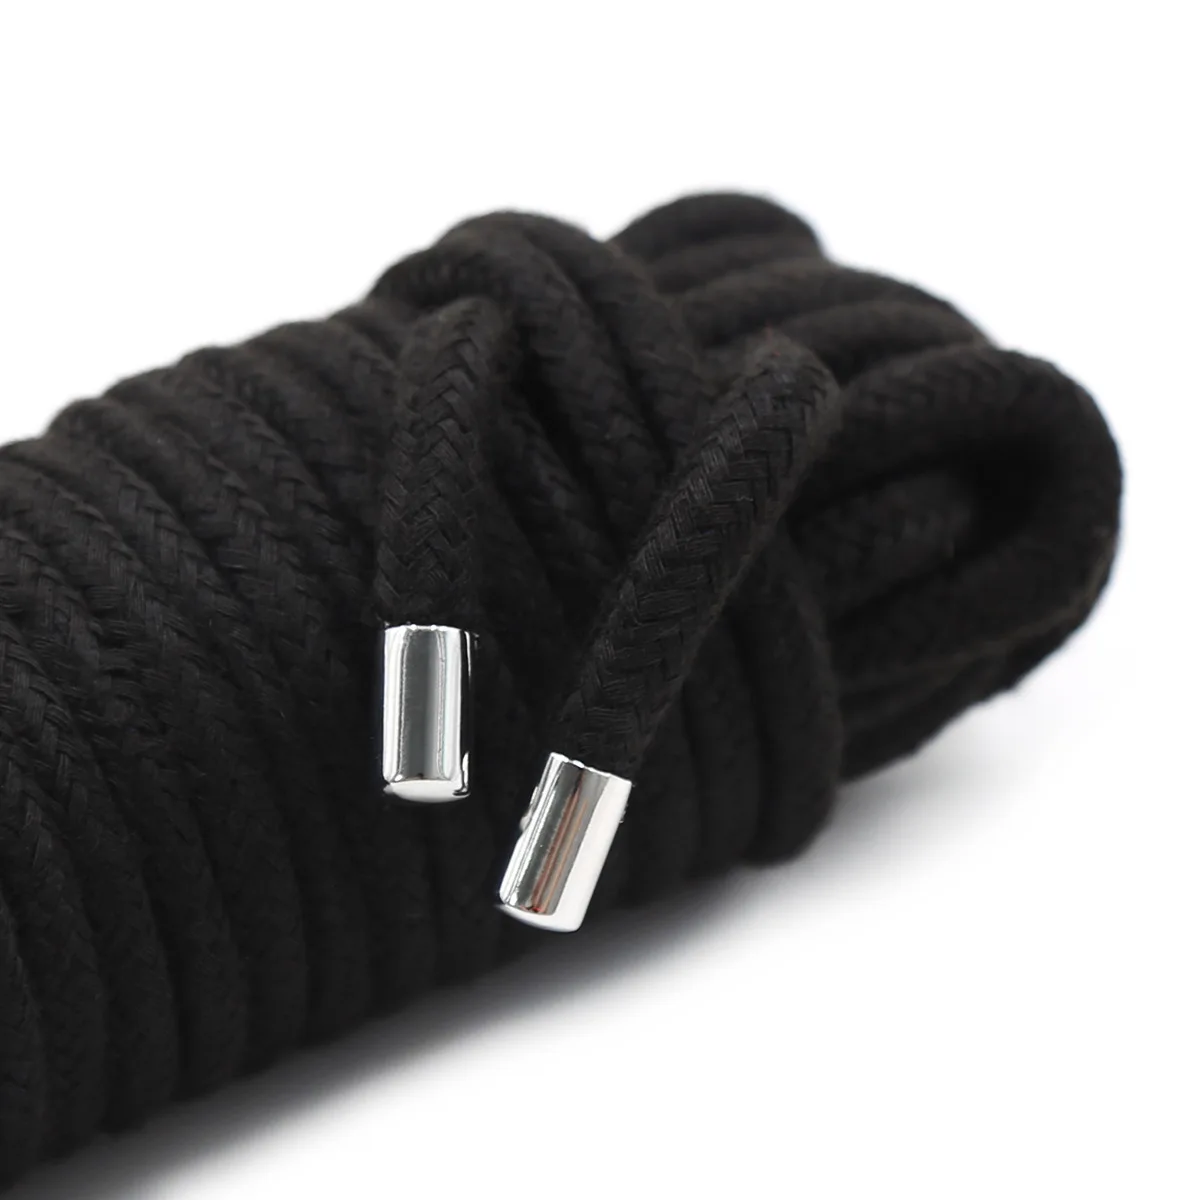 

High Quality Japanese Bondage Rope For Binding Binder Restraint To Slave Role Play,Erotic Shibari Accessory To Touch Tie Up Fun